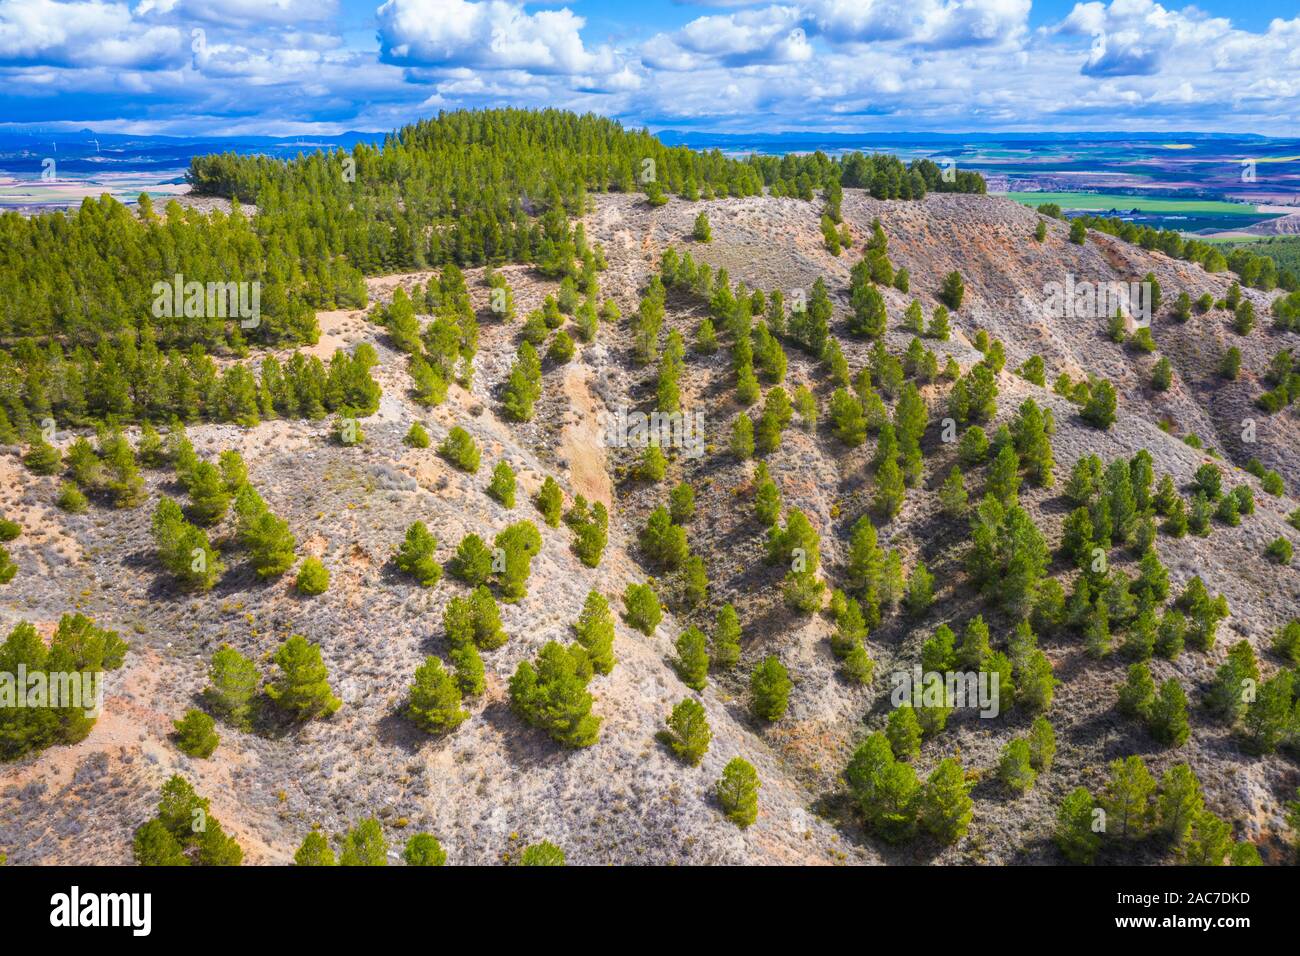 Pine trees in a forestry area. Stock Photo